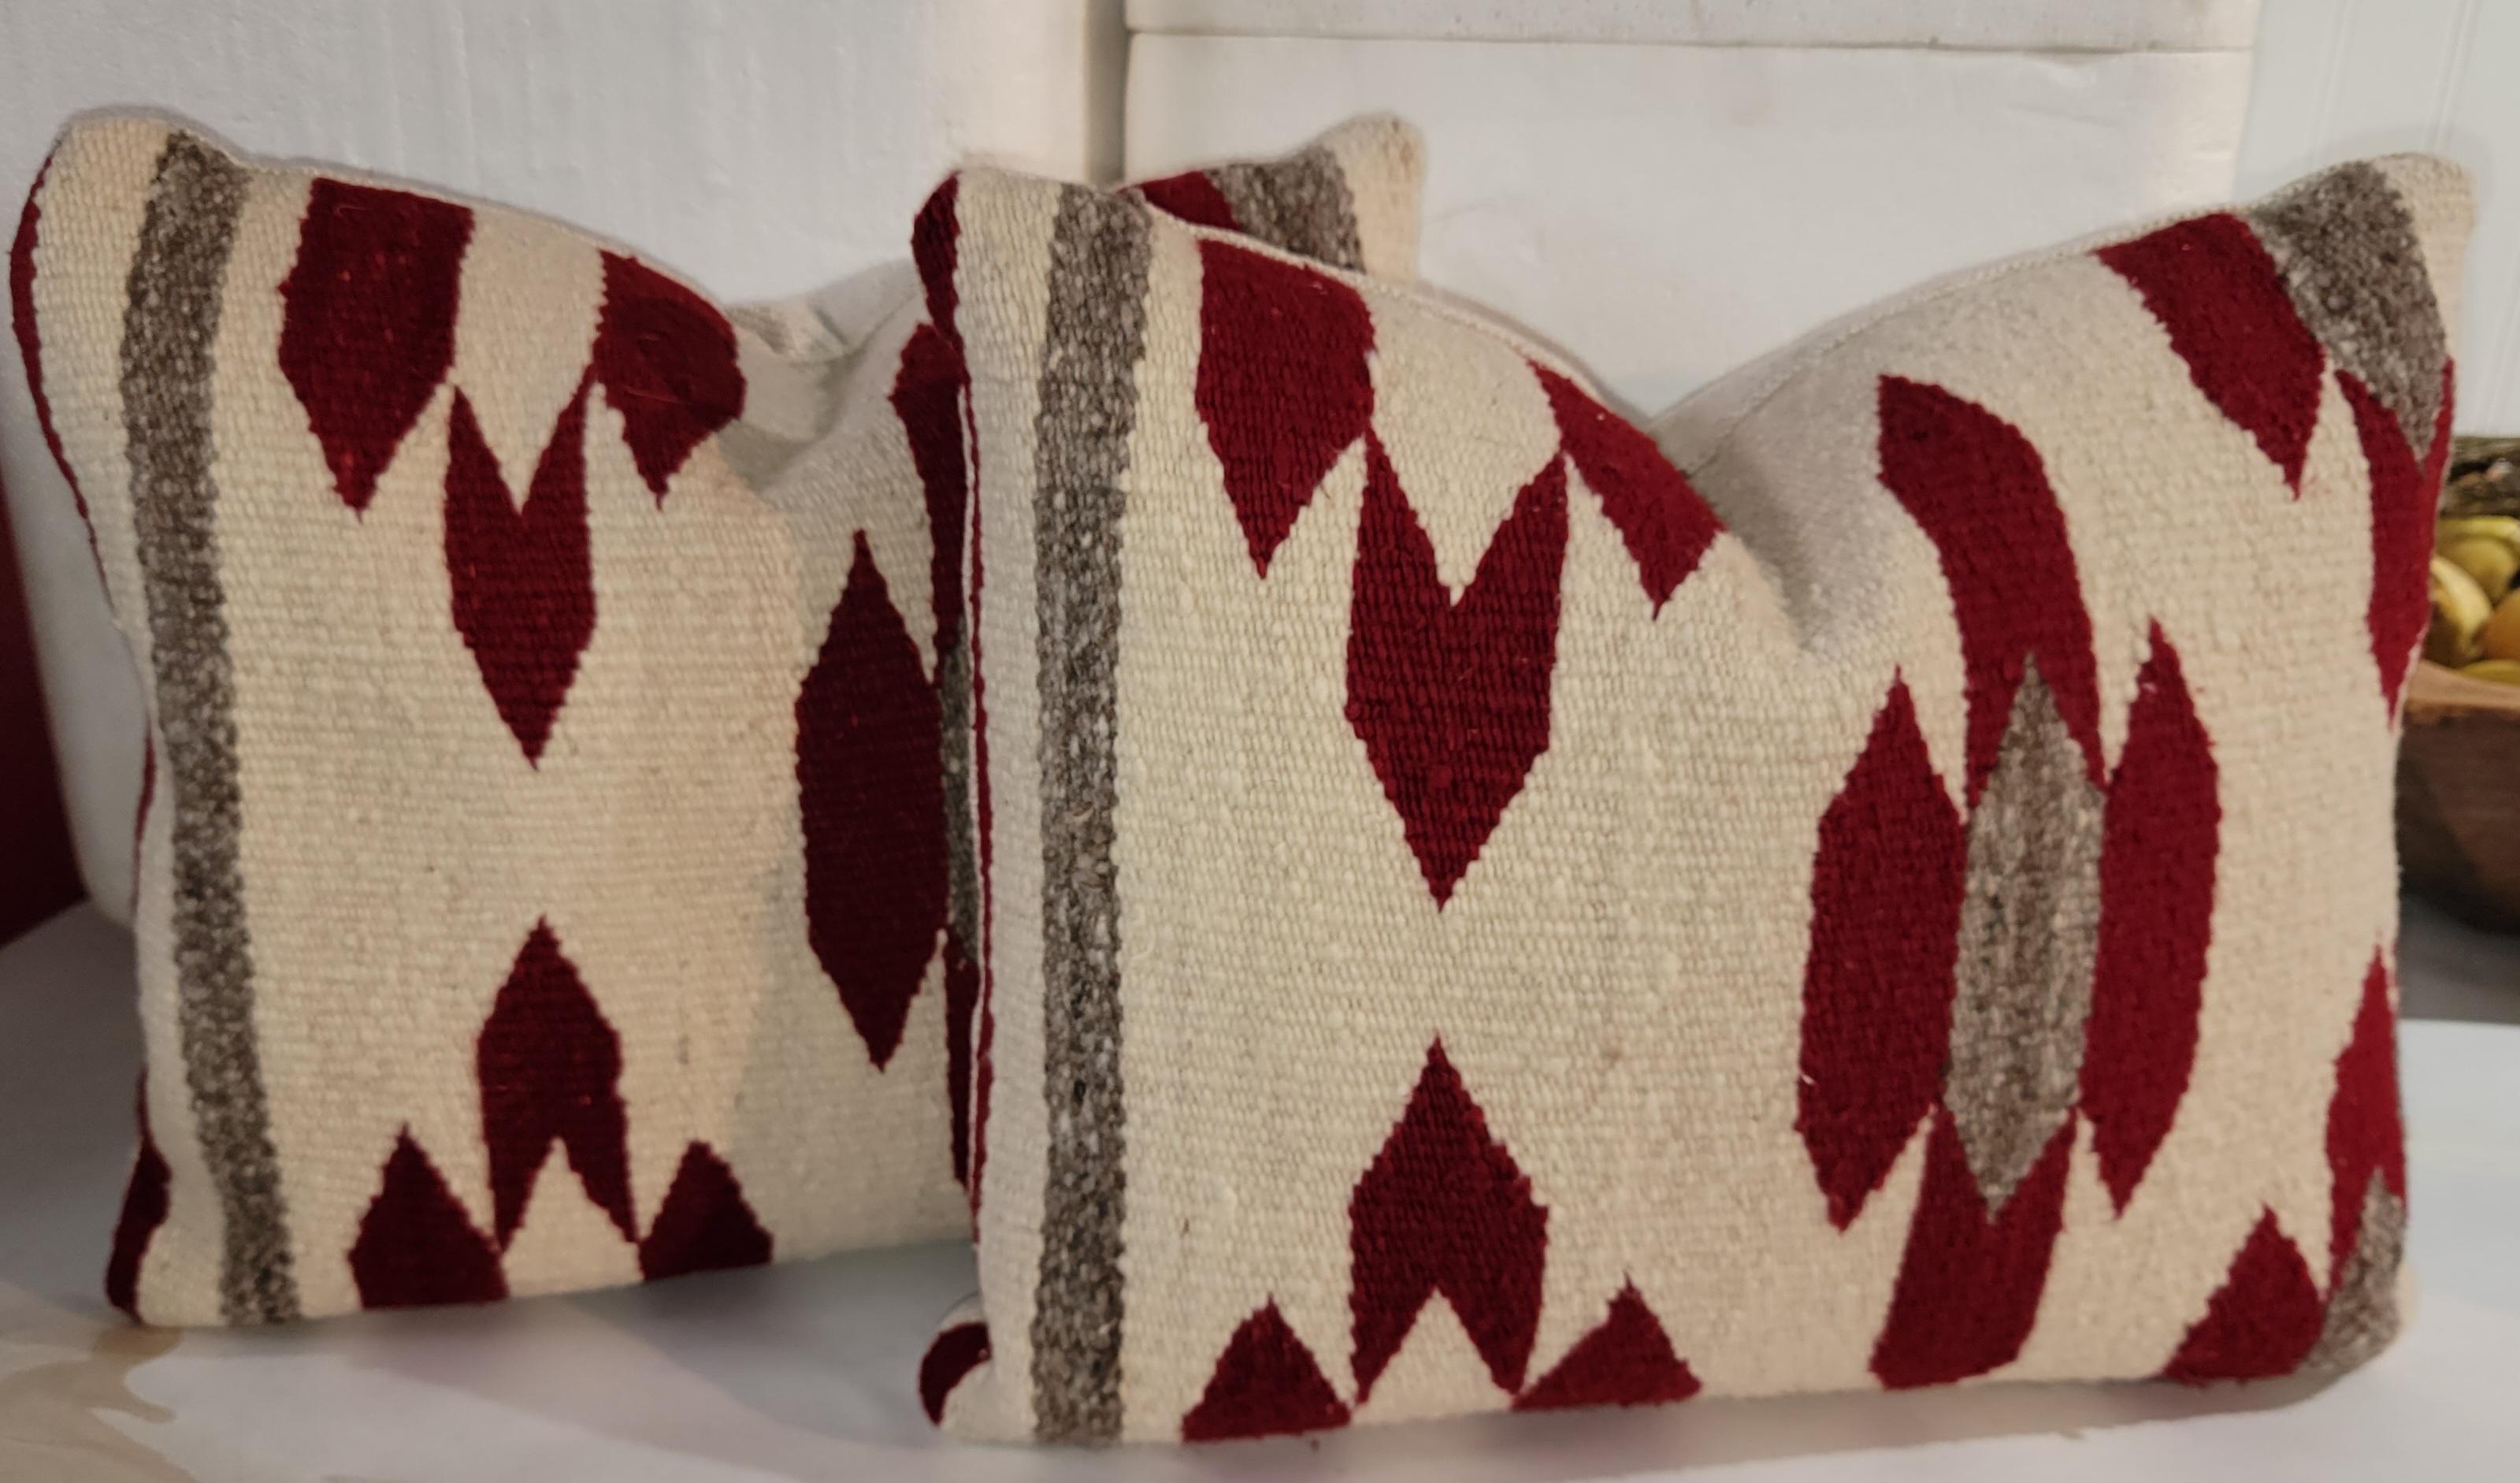 These Navajo Indian saddle blanket weavings were made into pillows with linen backings & down & feather fill.Three pairs that total six pillows. :

White red and brown Chevron design Pillows Measure approx - 16 x 17
Red and white Chevron pillows